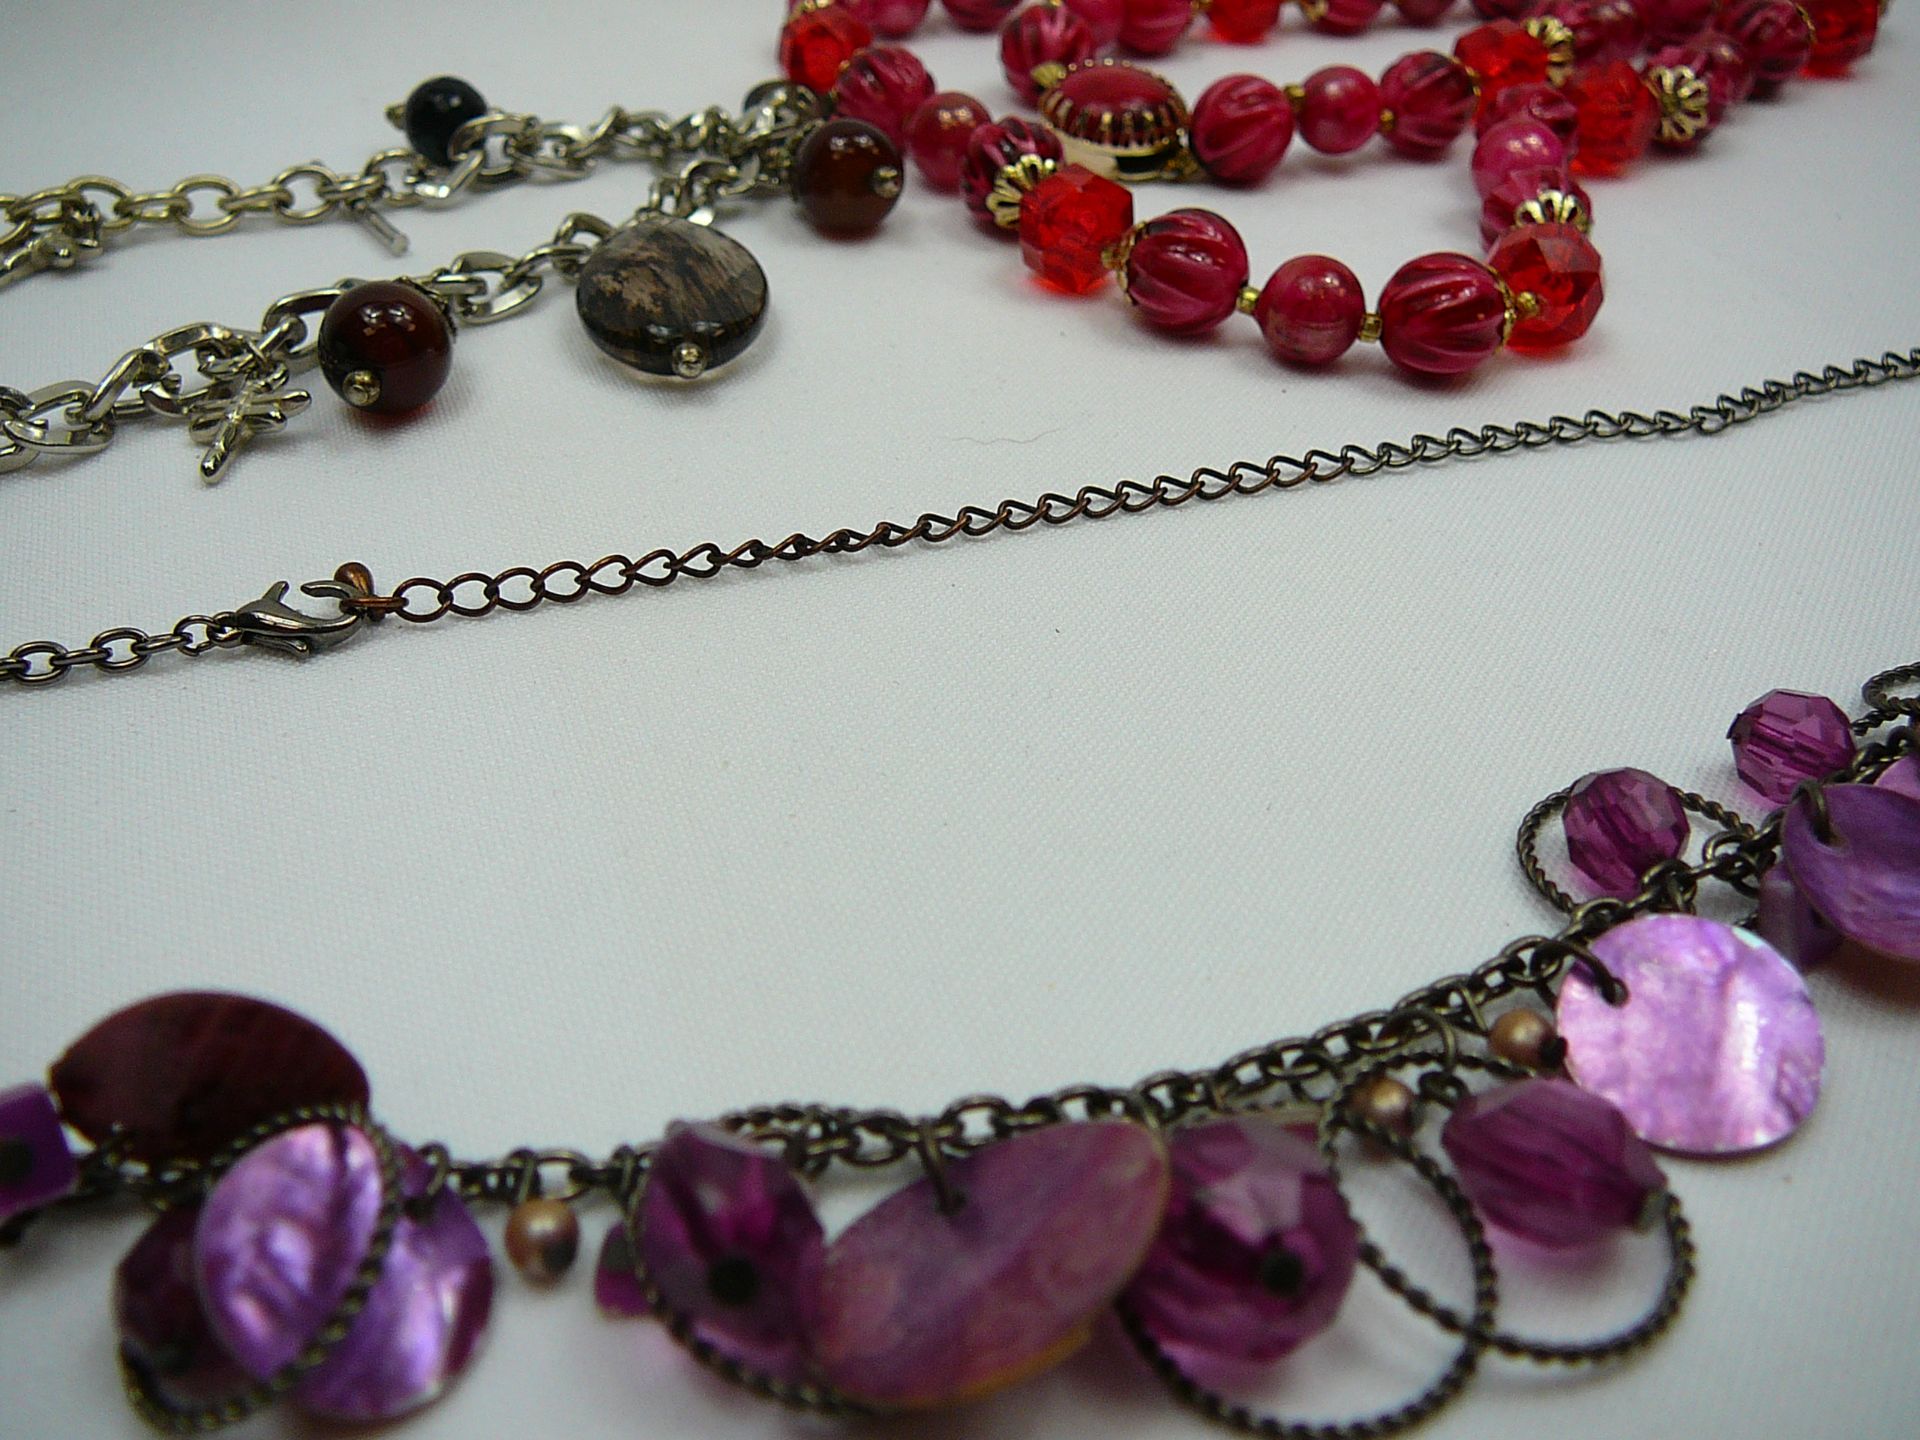 3 Vintage Beaded Necklaces - Image 2 of 2